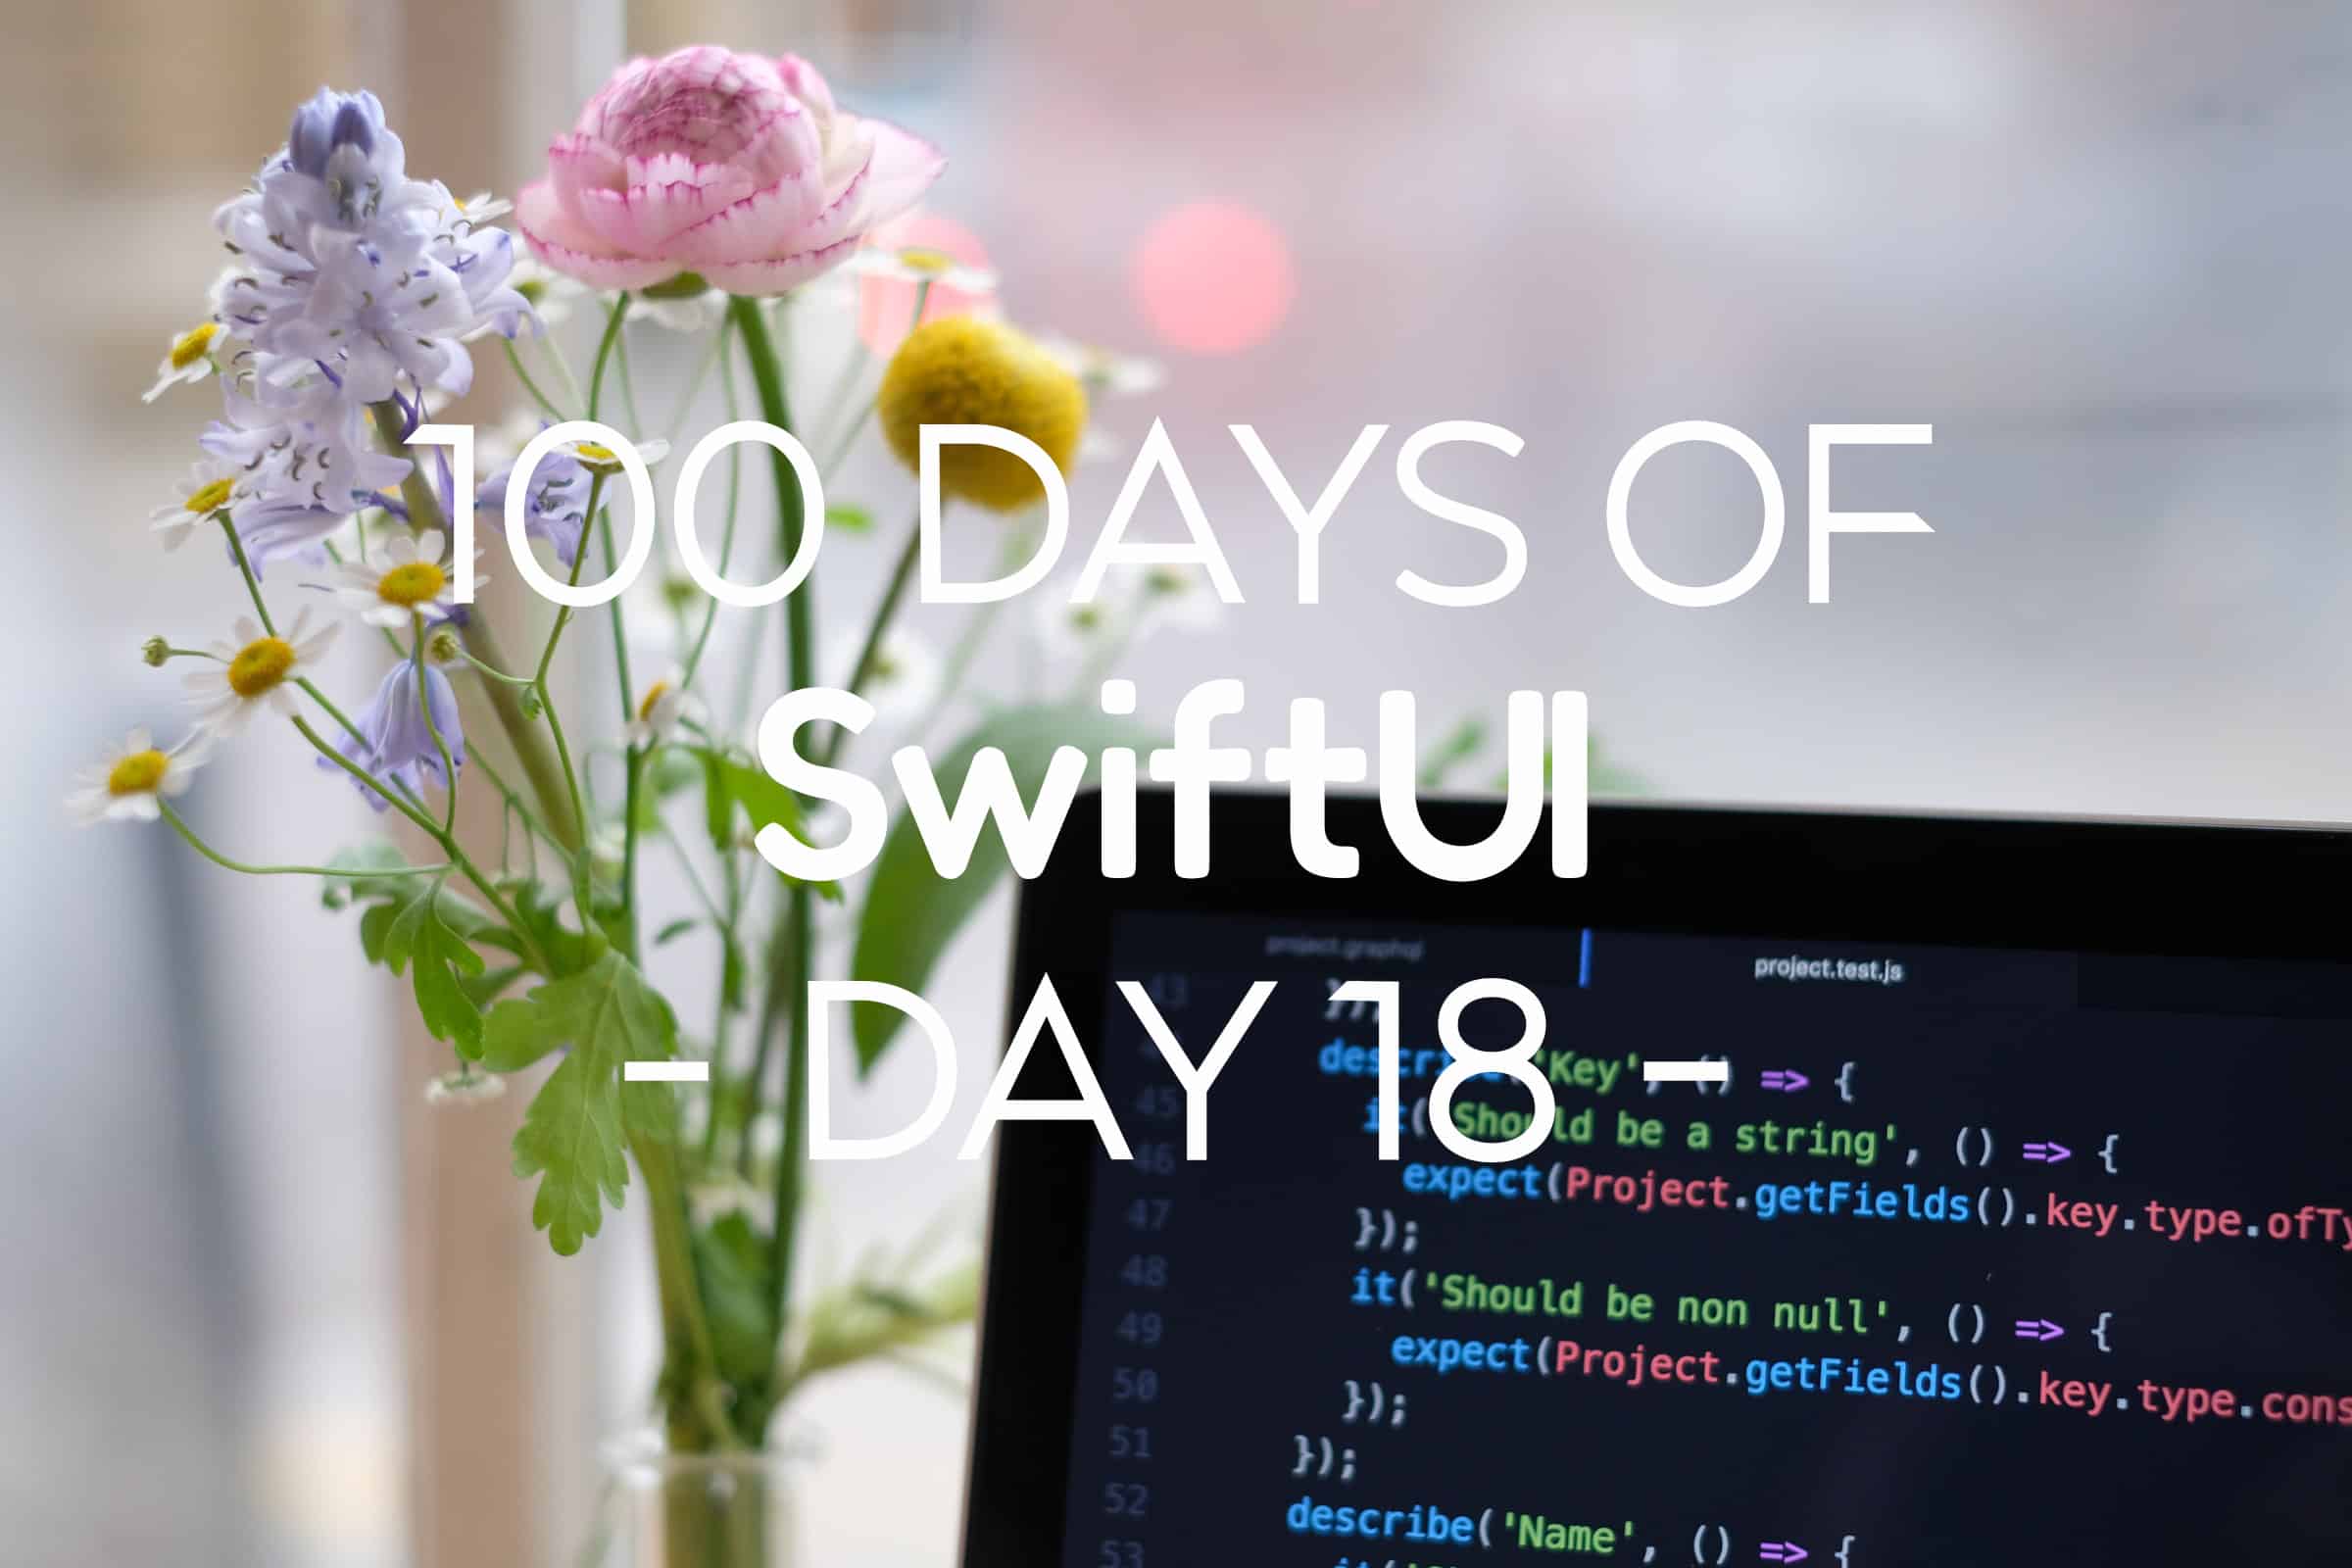 100 Days of SwiftUI Day 18